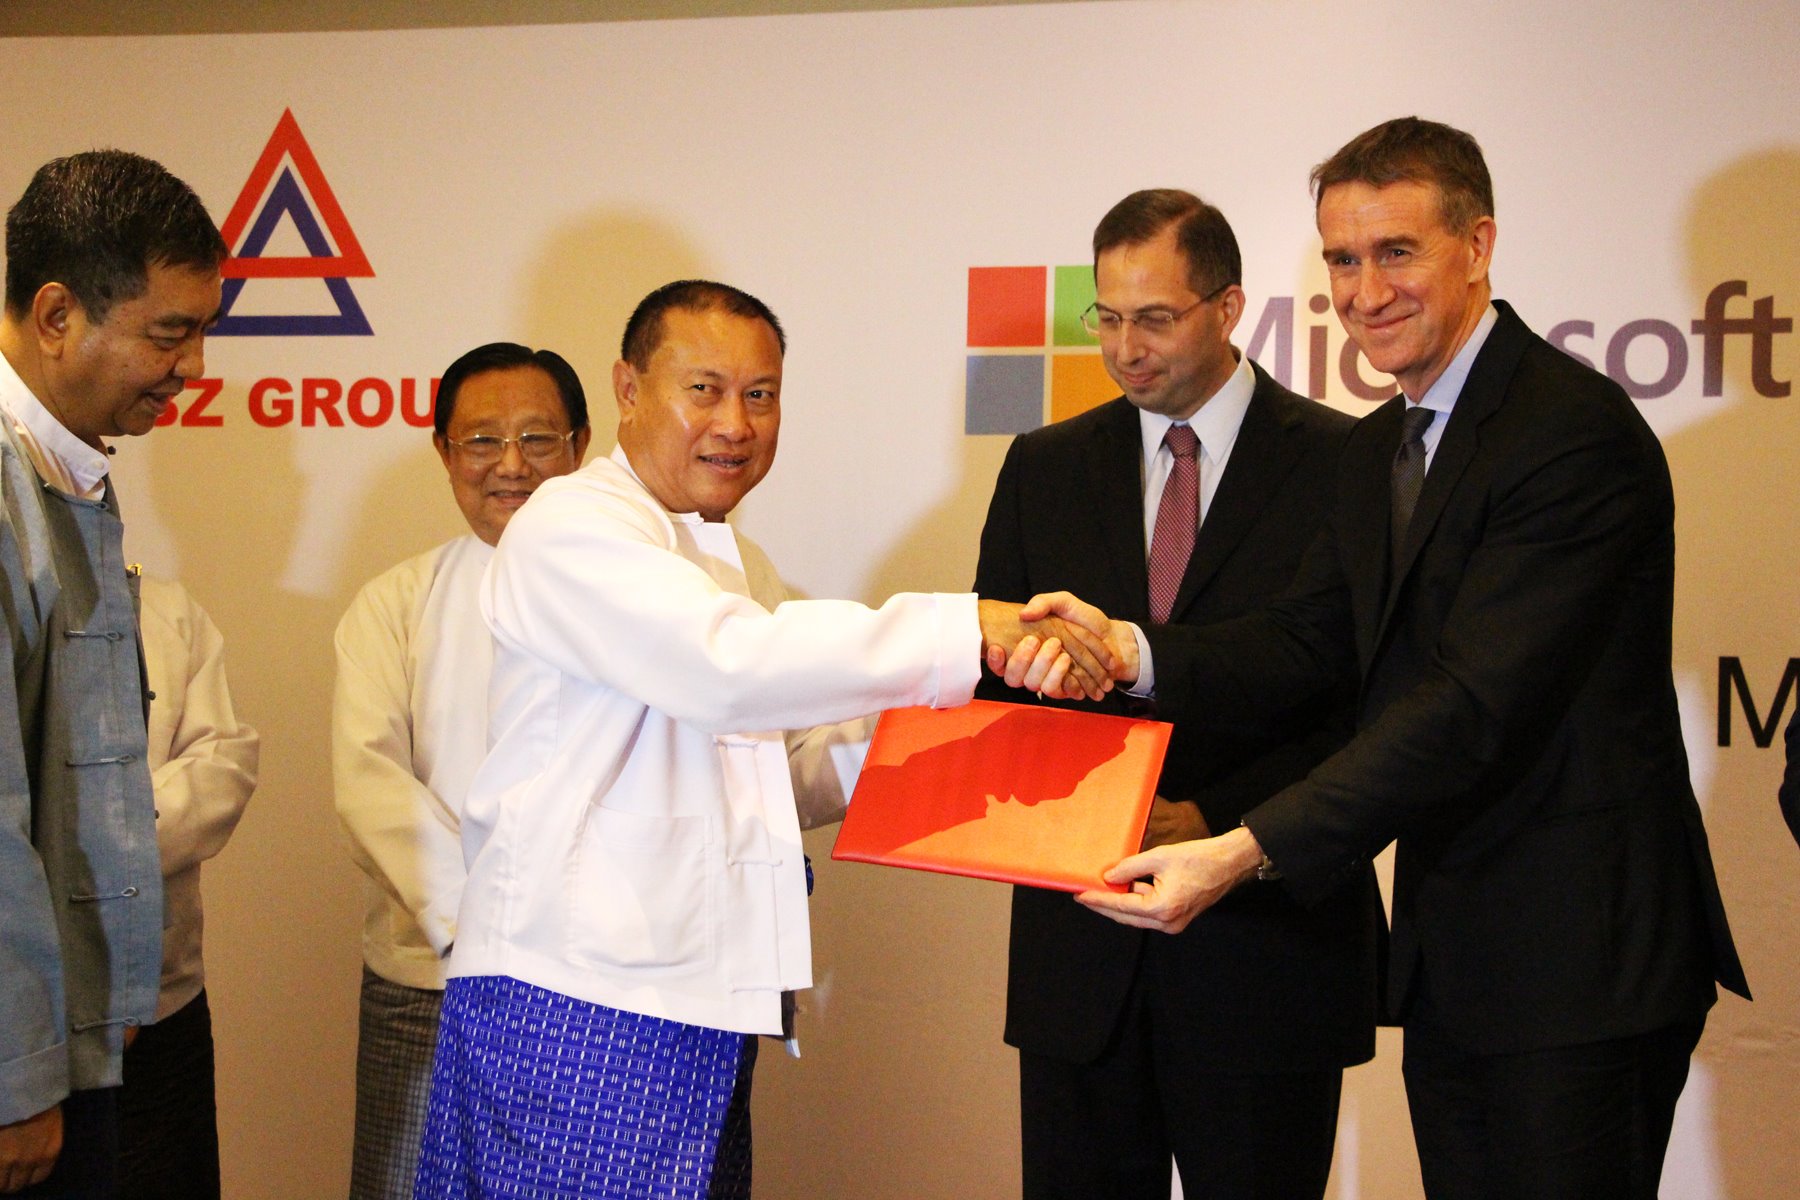 Aung Ko Win, chairman, KBZ Group of Companies exchanging the signed agreement with Bertrand Launay, vice president, Microsoft Asia. The ceremony was witnessed by Derek Mitchell, U.S. Ambassador to Burma.